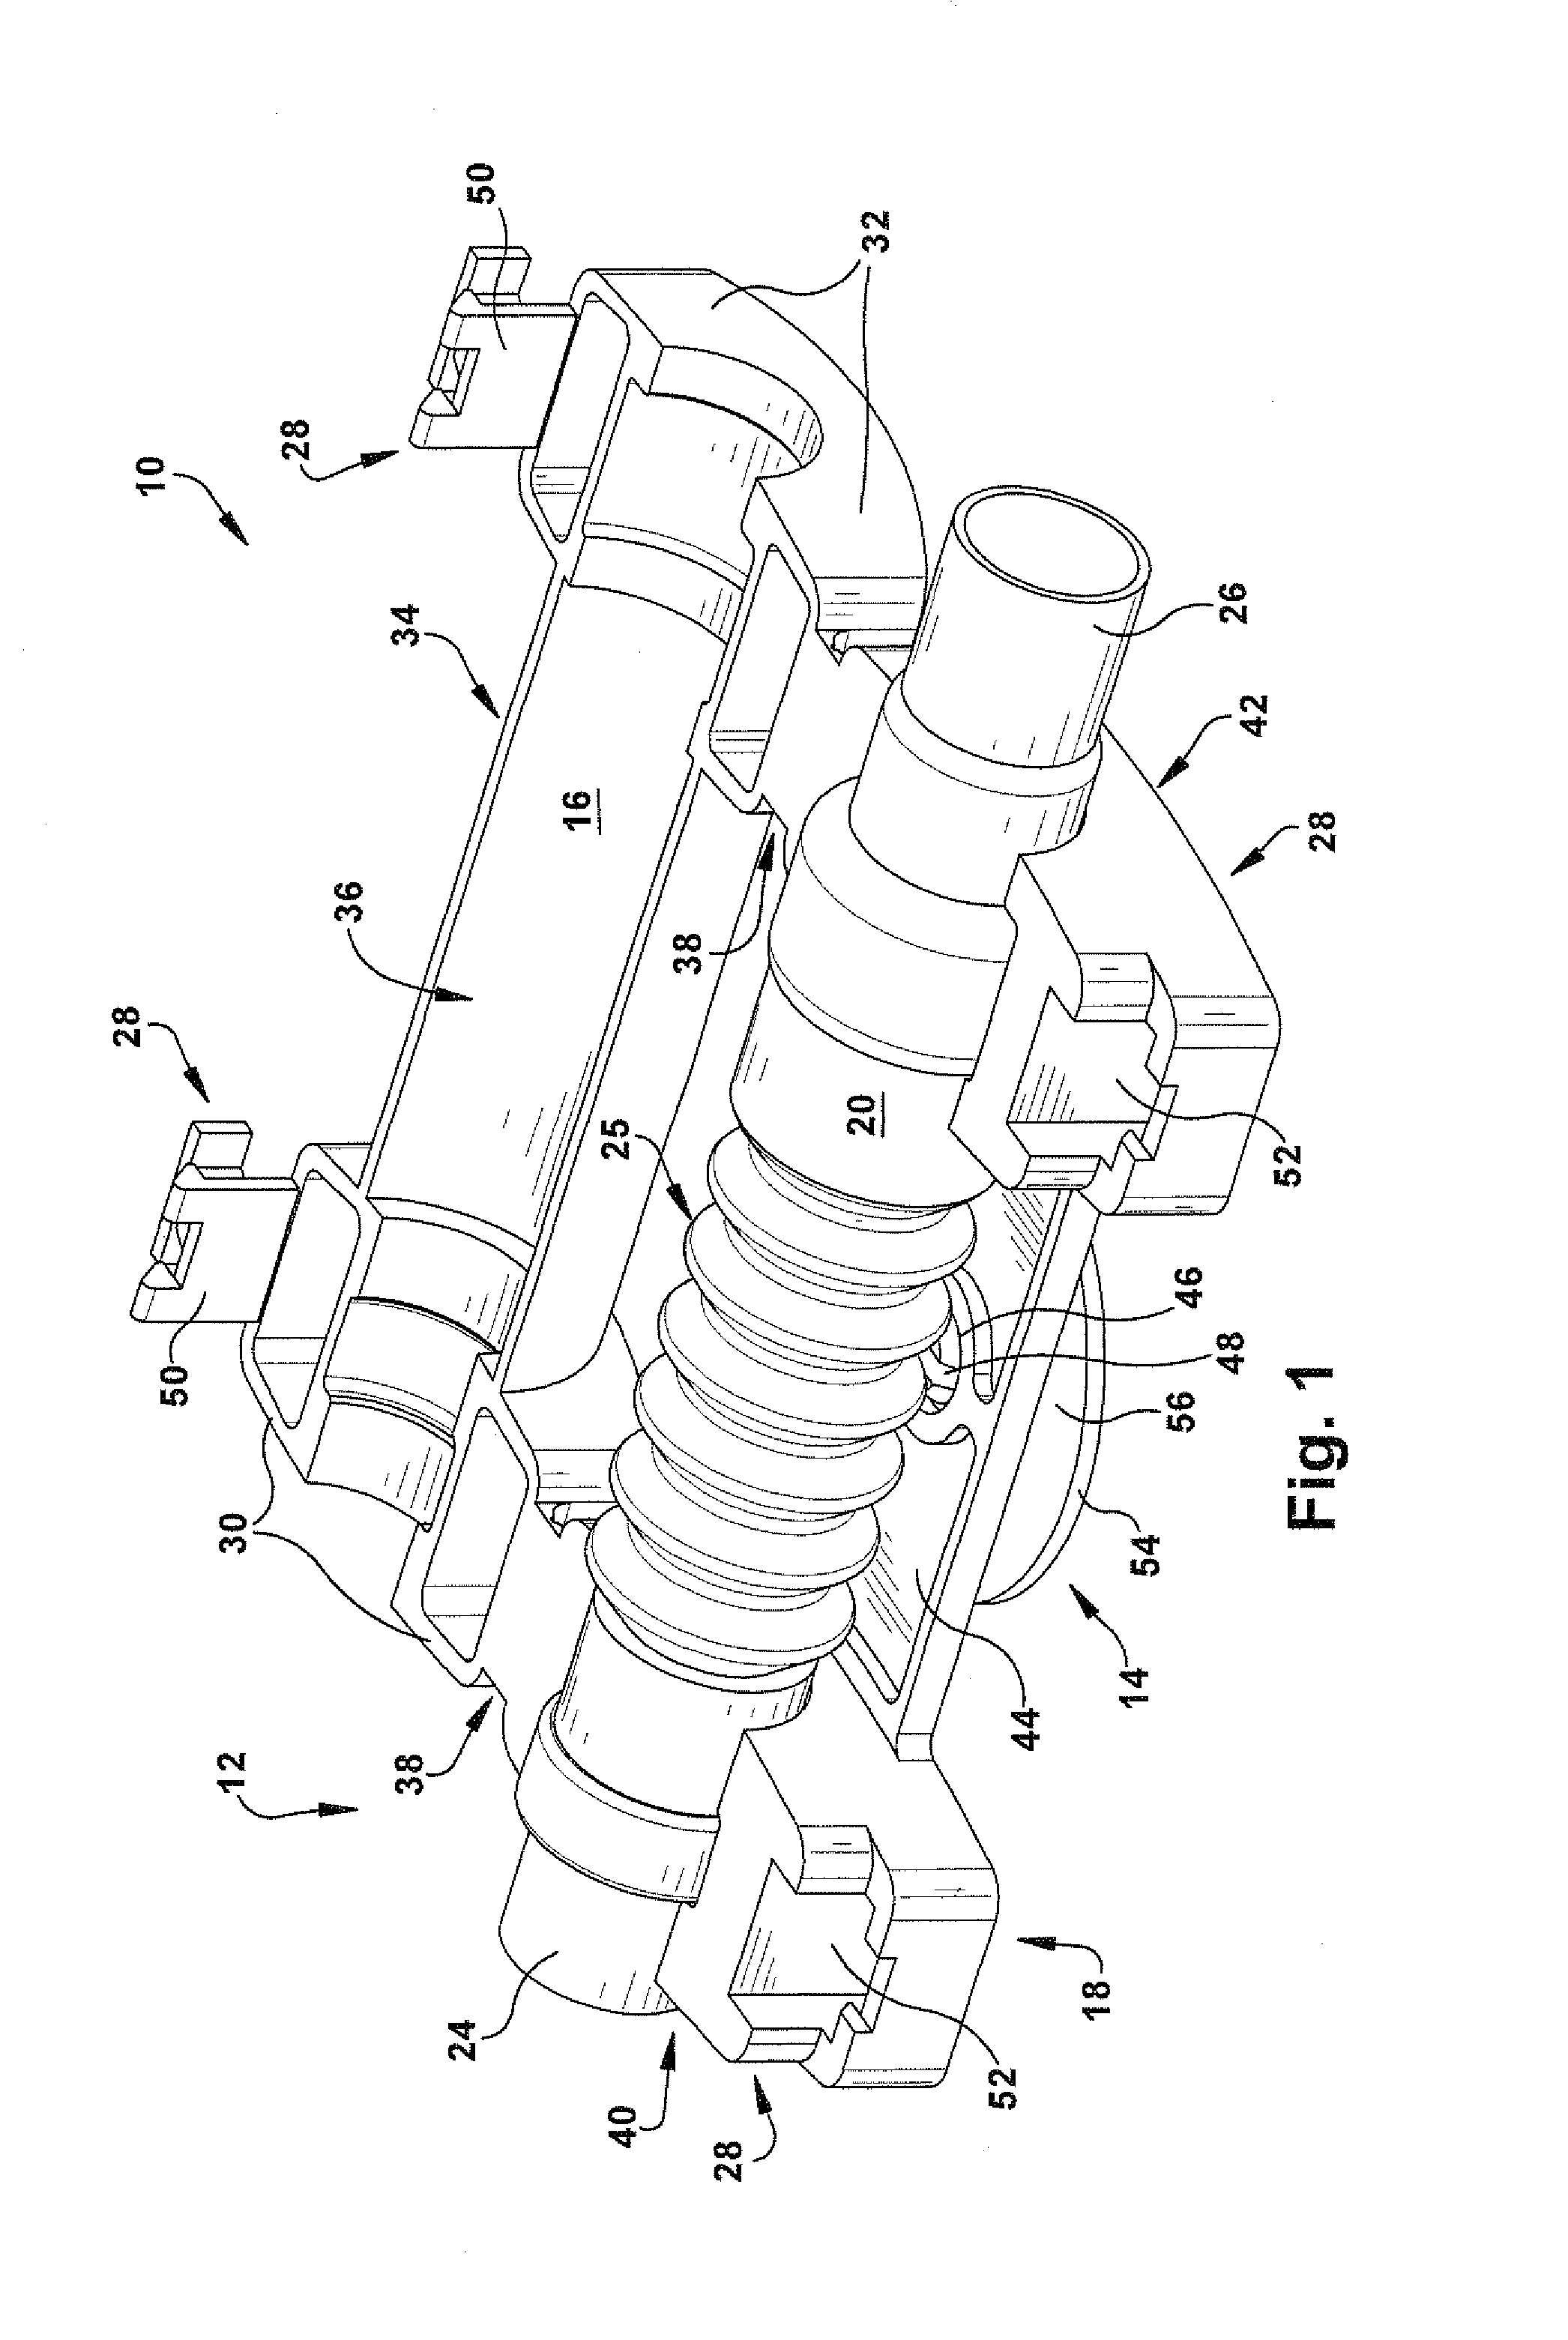 Urinary catheter stabilizer and method of use